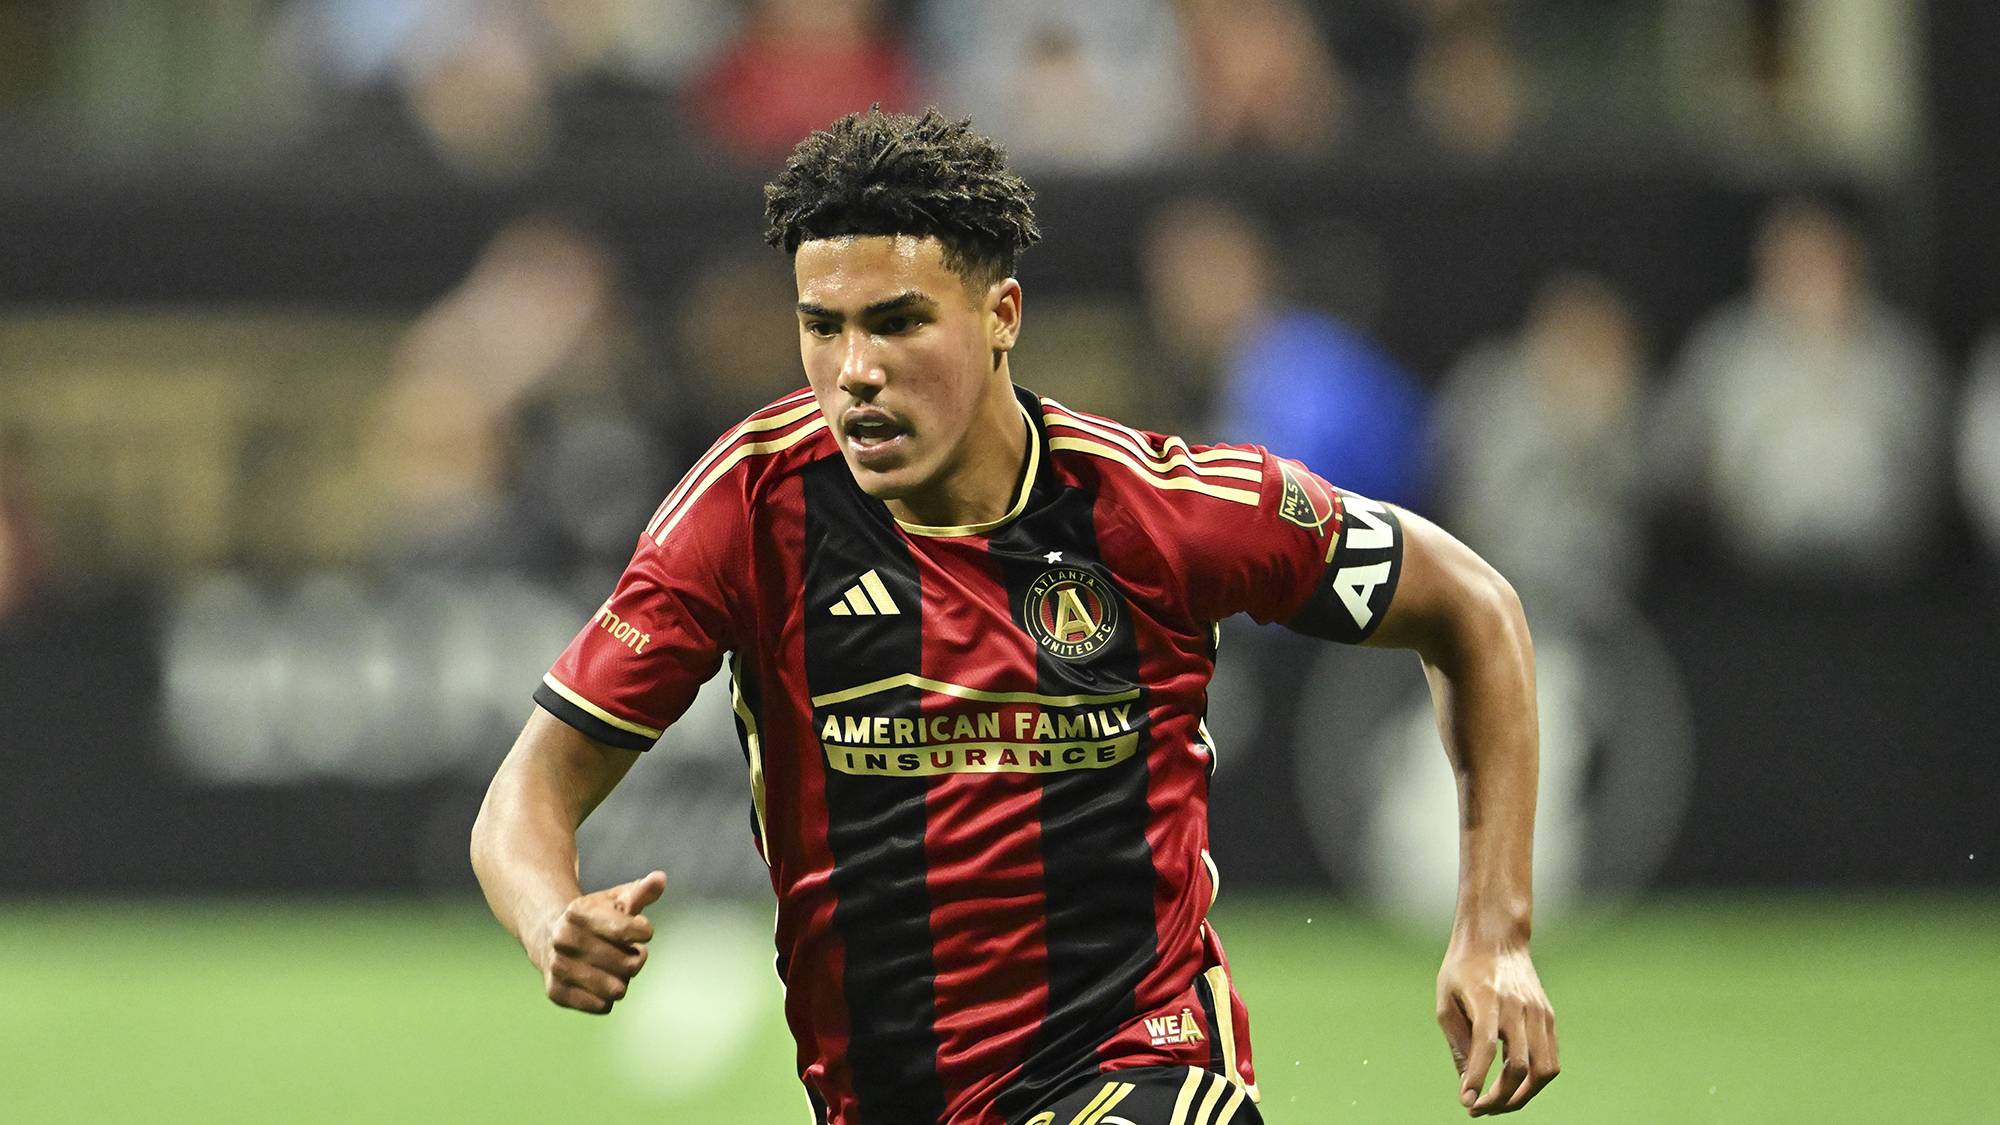 Atlanta United defender Caleb Wiley (26) scored a goal as the 18-year-old helped his team to a 5-1 win over the Portland Timbers on Saturday, March 18, 2023, at Atlanta.